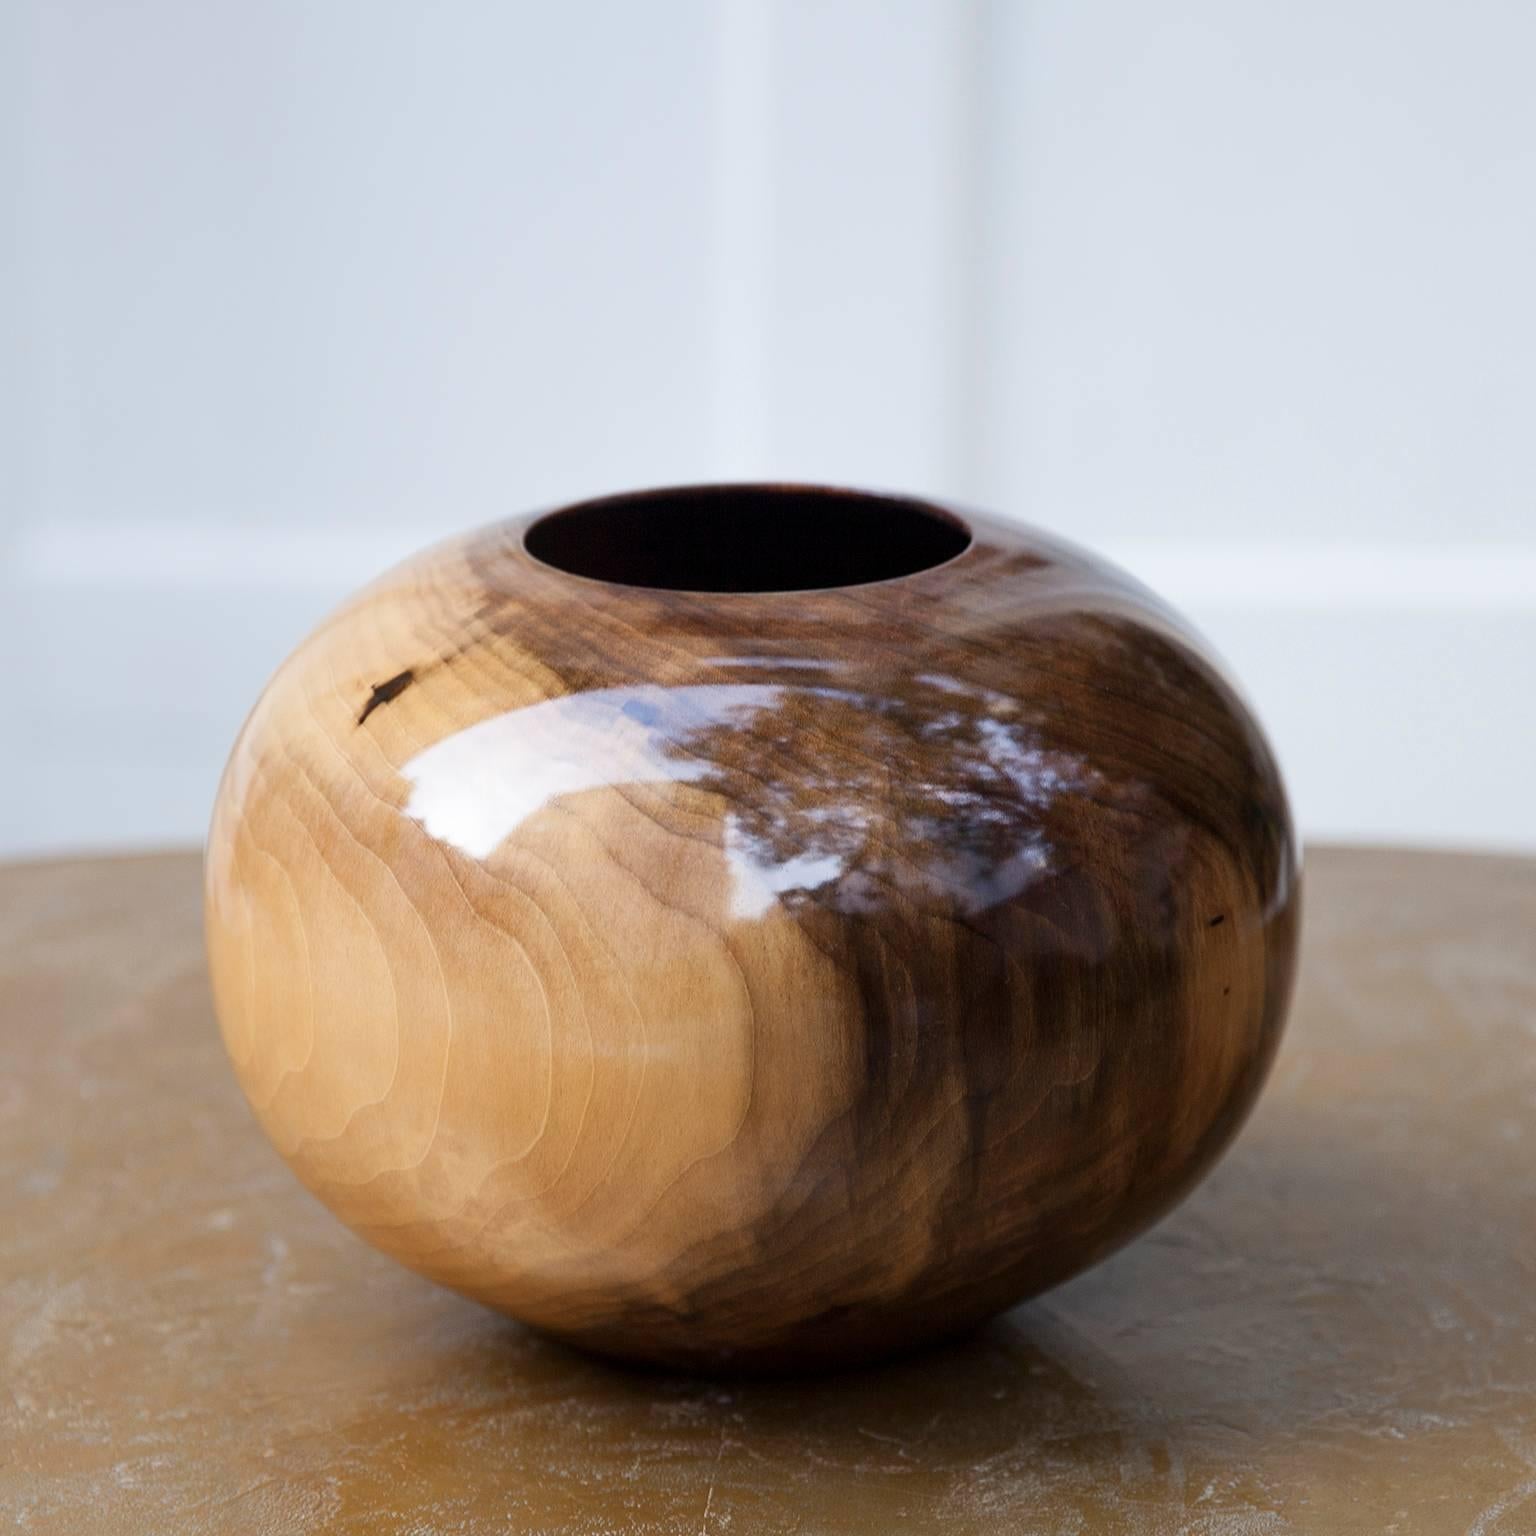 Very rare Ed Moulthrop vessel bowl, USA, 1980s. Figured tulipwood bowl vessel with gorgeous pattern. An American crafts vase designed and produced by Edward Moulthrop (1916-2003) in spherical form and in excellent condition. The vase is signed and